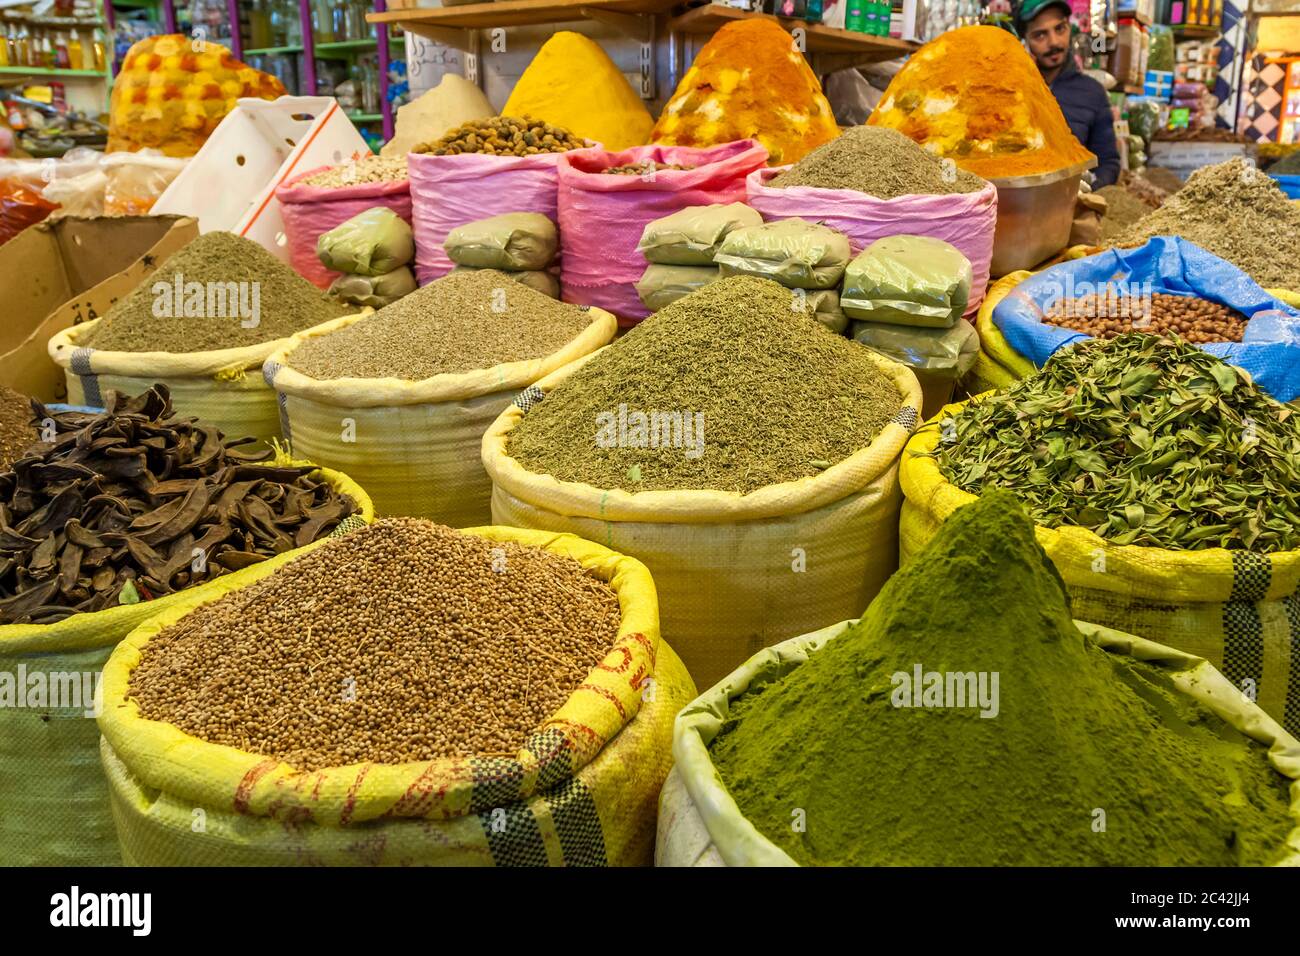 Market stand in Meknes, Marocco. Opulent spice backdrop: whether cinnamon bark, bay leaf, turmeric or chilli pepper, the fragrances pile up at Moroccan spice markets Stock Photo